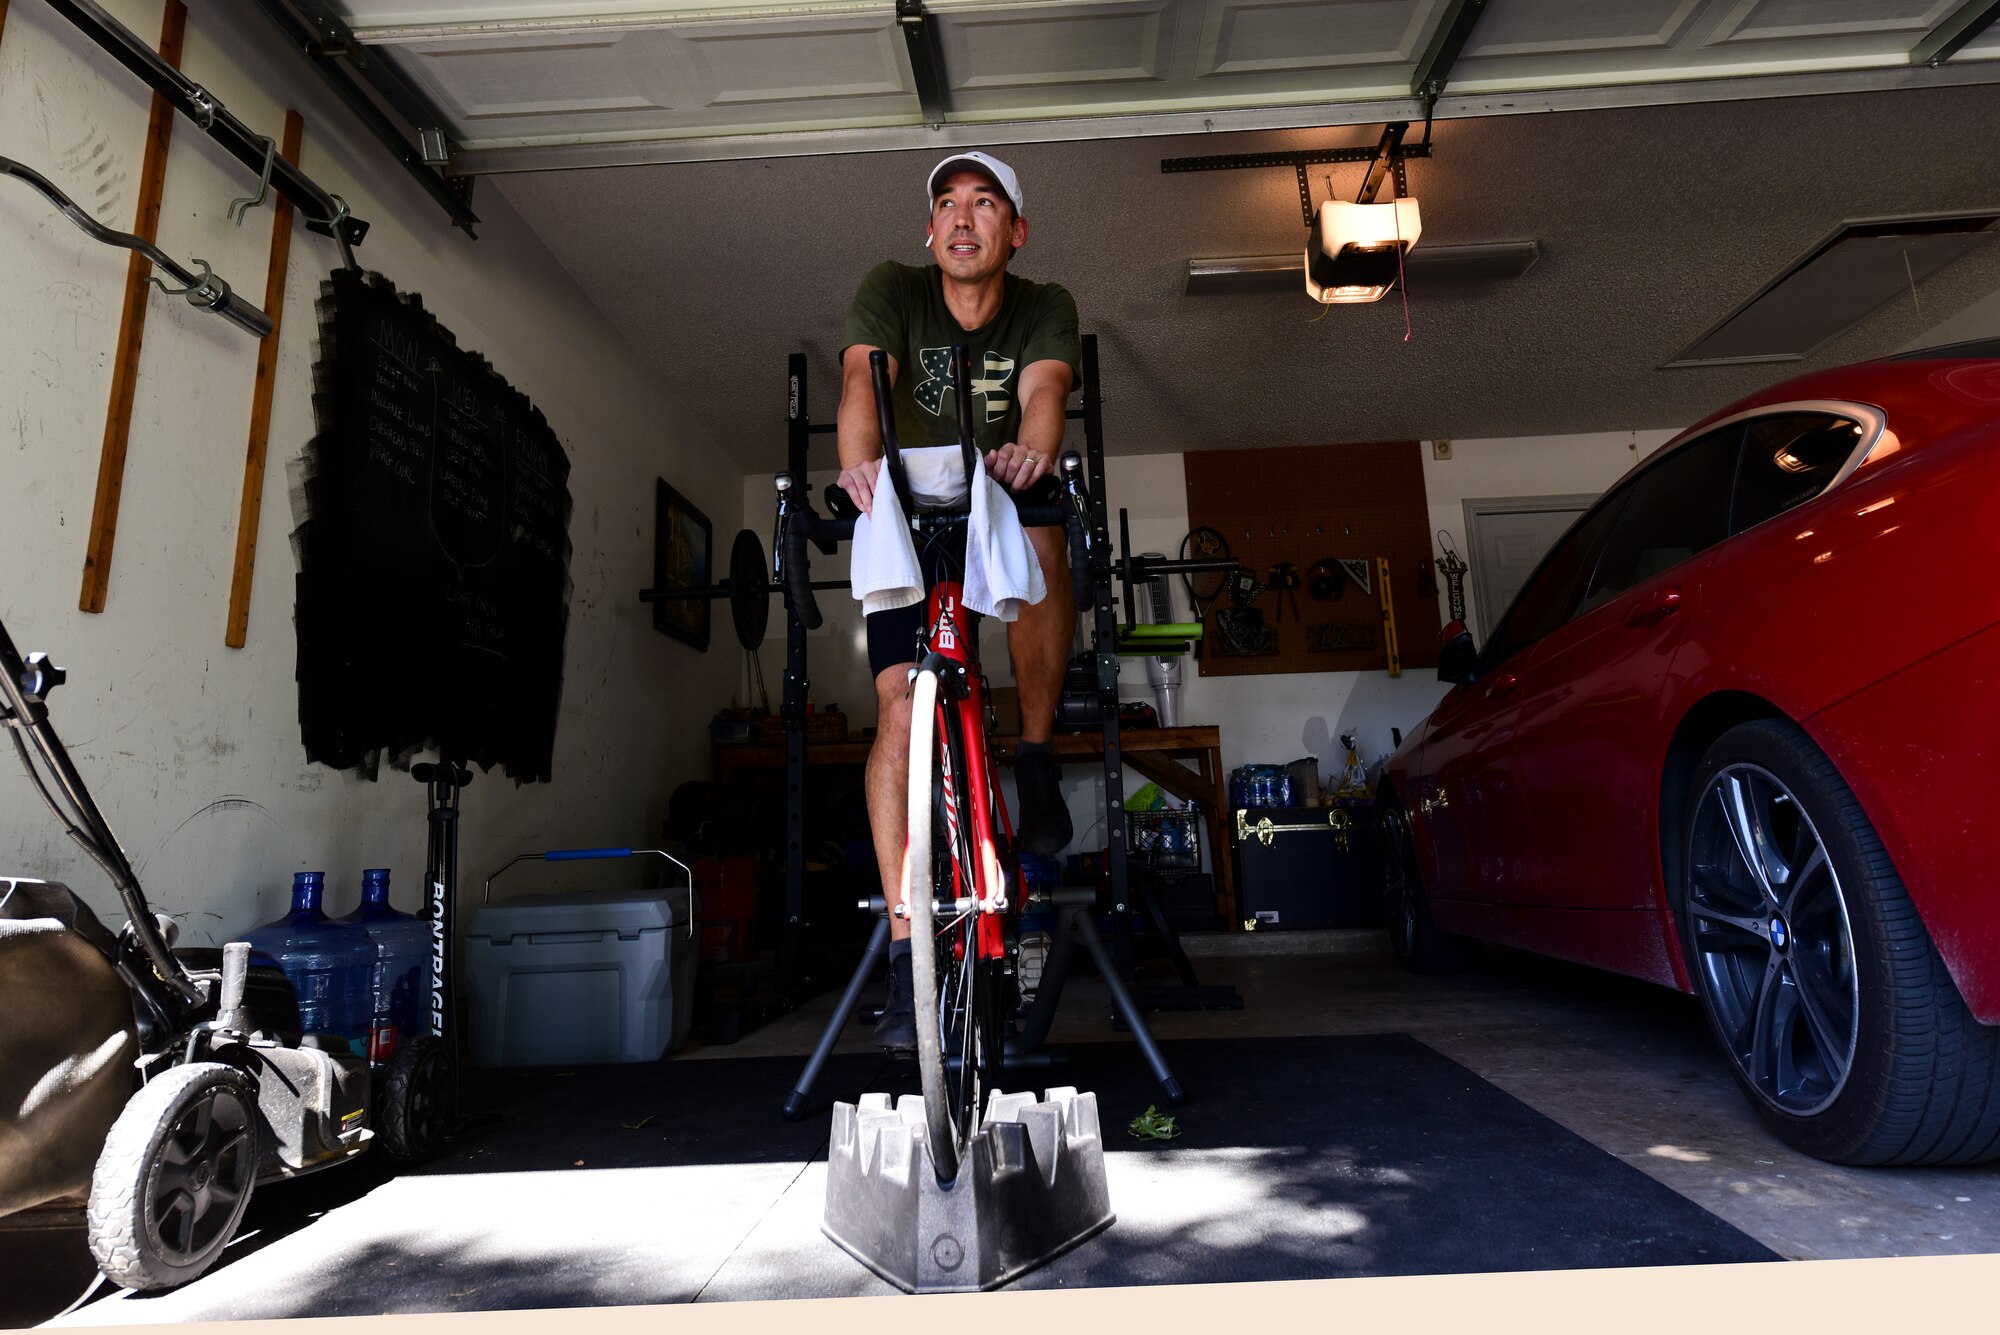 Capt. Joshua White, 434th Flying Training Squadron X flight commander and instructor pilot, cycles in place for his morning workout, April 23, 2020 in Del Rio, Texas. To him, biking isn’t about the exercise as much as it’s about the ability to be present--not wrapped up in the past or future. For many whose schedules are altered due to quarantine, there is more time to pursue fitness. (U.S. Air Force photo by Senior Airman Anne McCready)